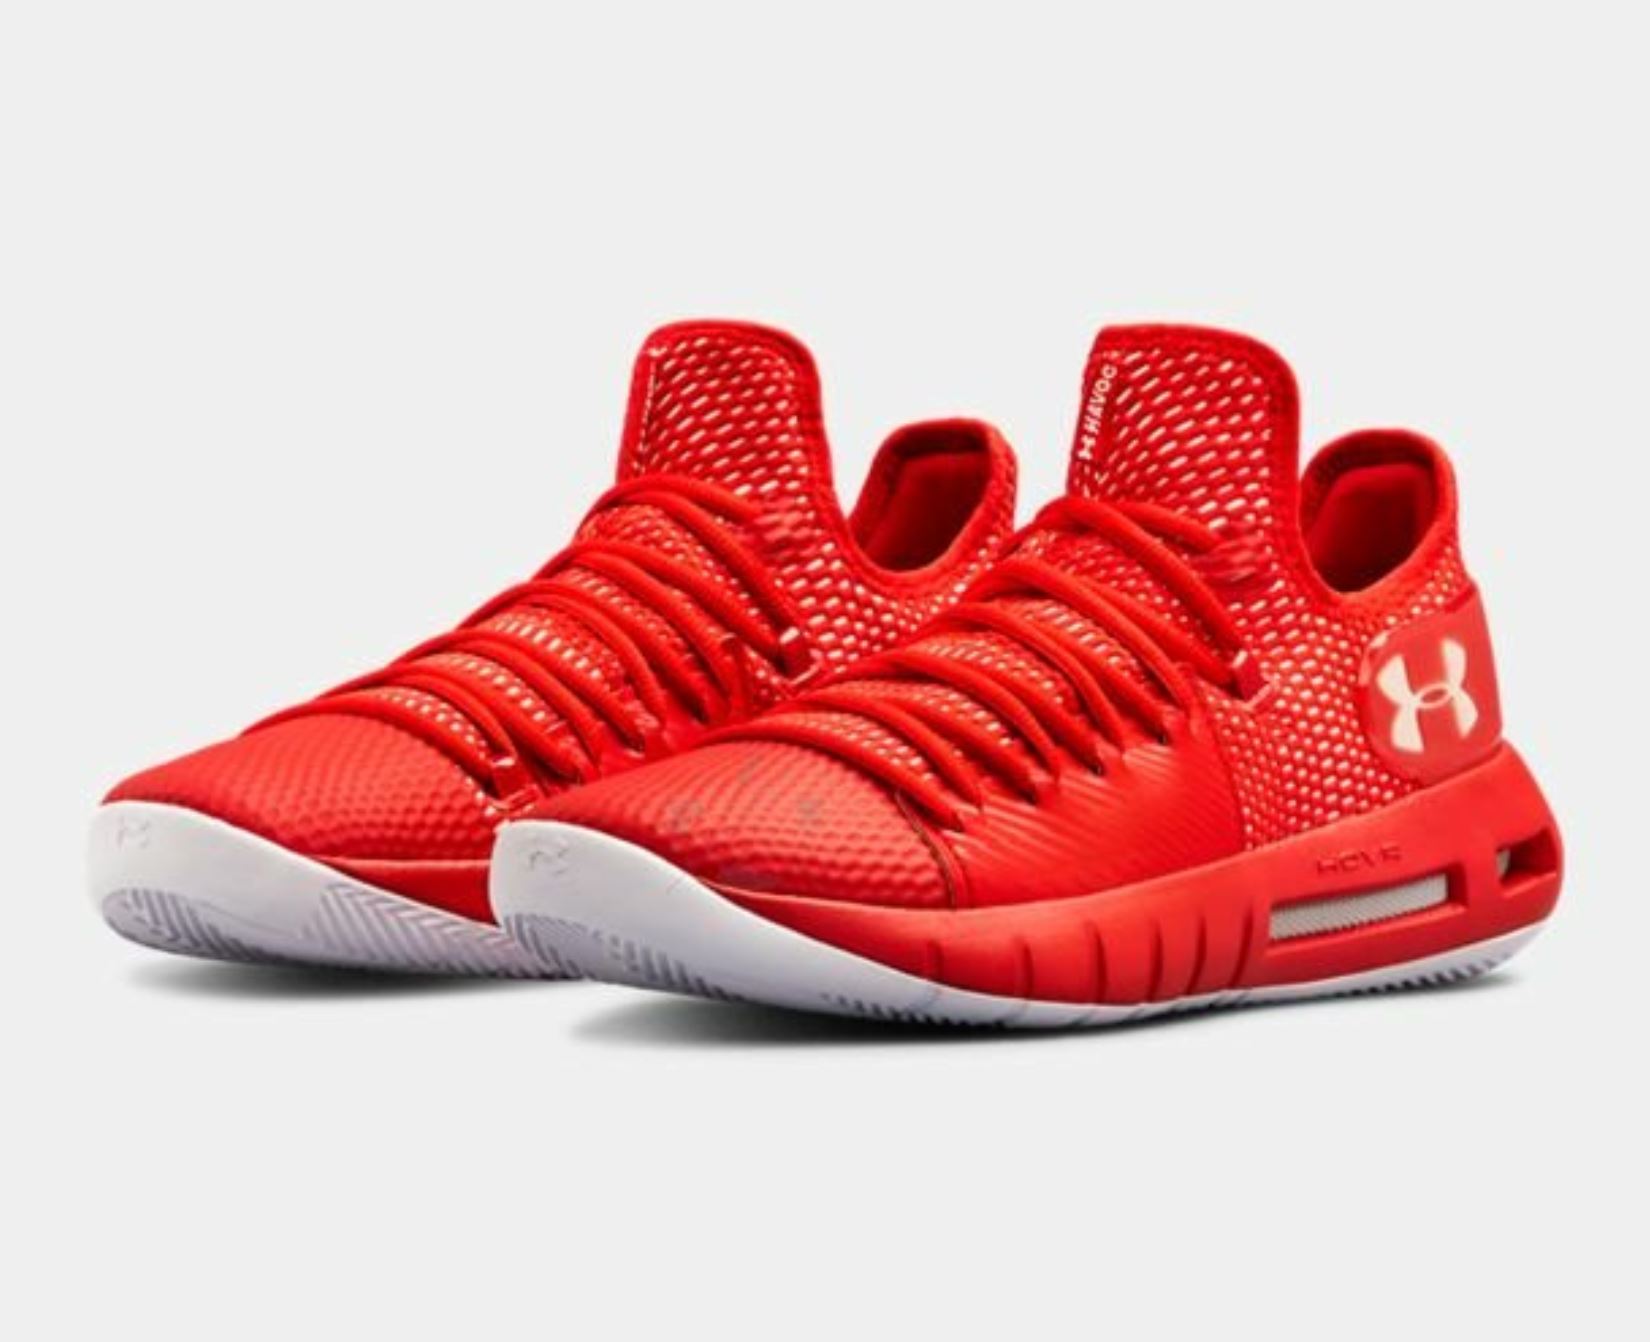 Under Armour Mens HOVR Havoc Low Basketball Shoes 